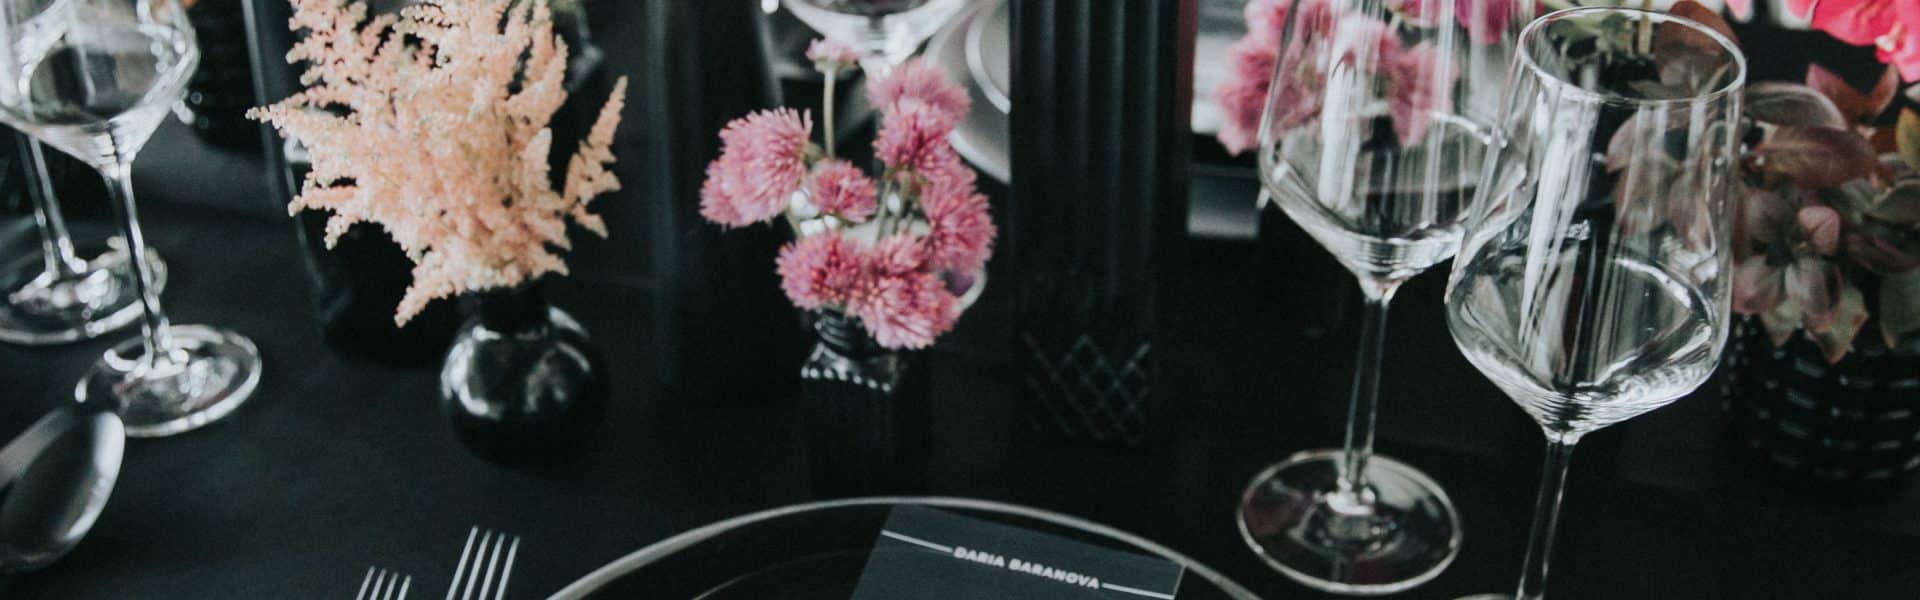 Black and pink table setting